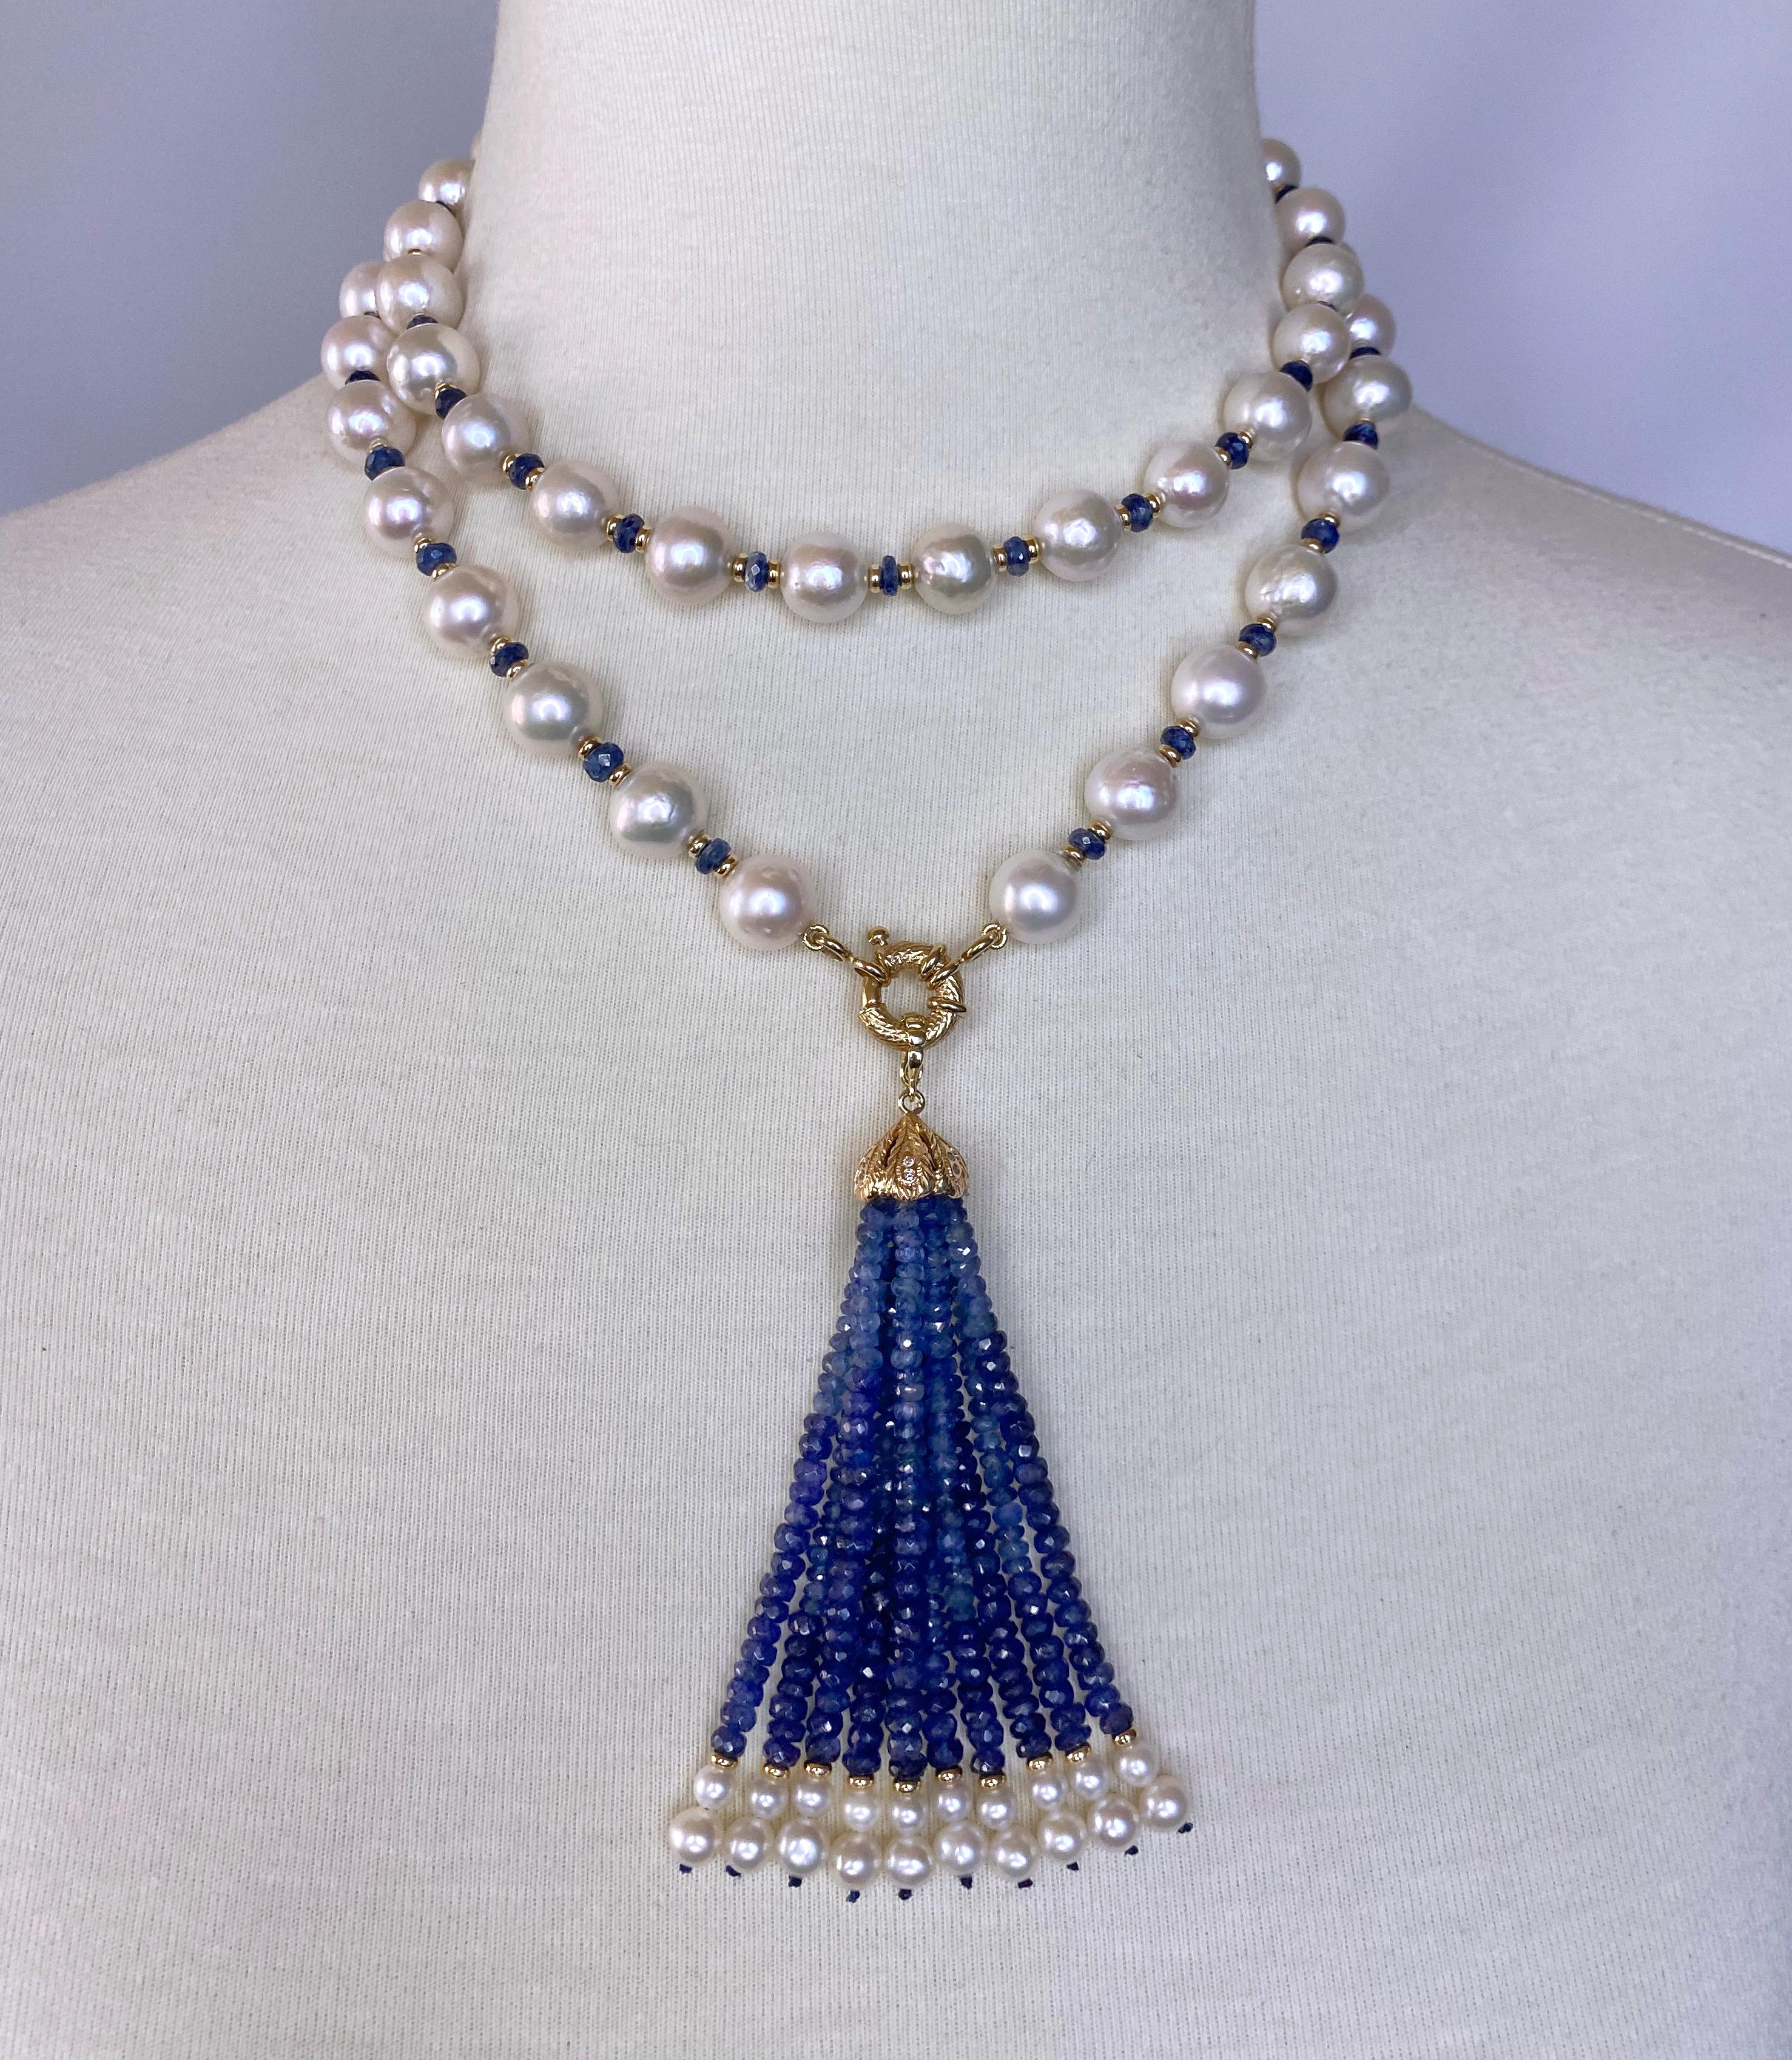 Gorgeous Lariat / Sautoir hand woven by Marina J. This piece is made using all cultured white Pearls which display a beautiful iridescent sheen, Faceted Blue Sapphires and solid 14k Yellow Gold findings. Due to their pigmented yet semi translucent